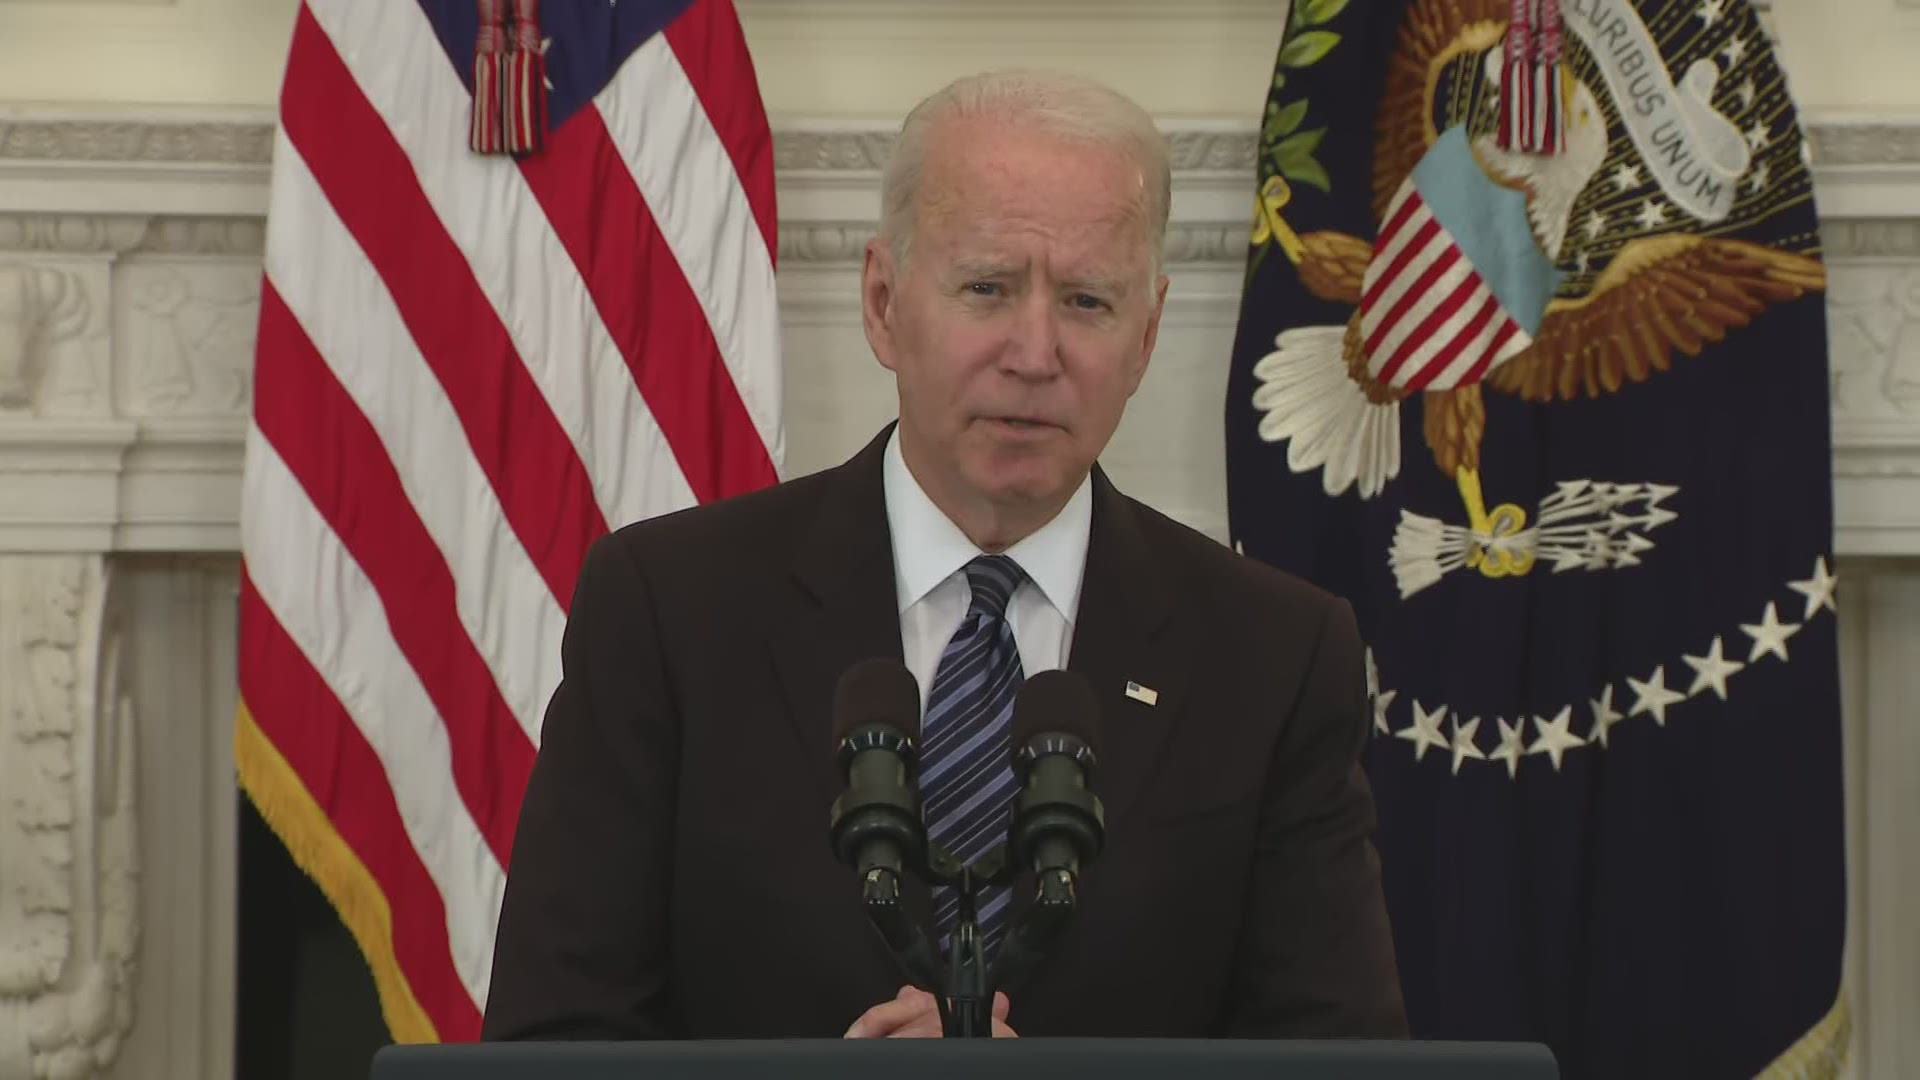 President Joe Biden spoke to the press Wednesday after a roundtable discussion on reforms that would help curb gun violence in the US